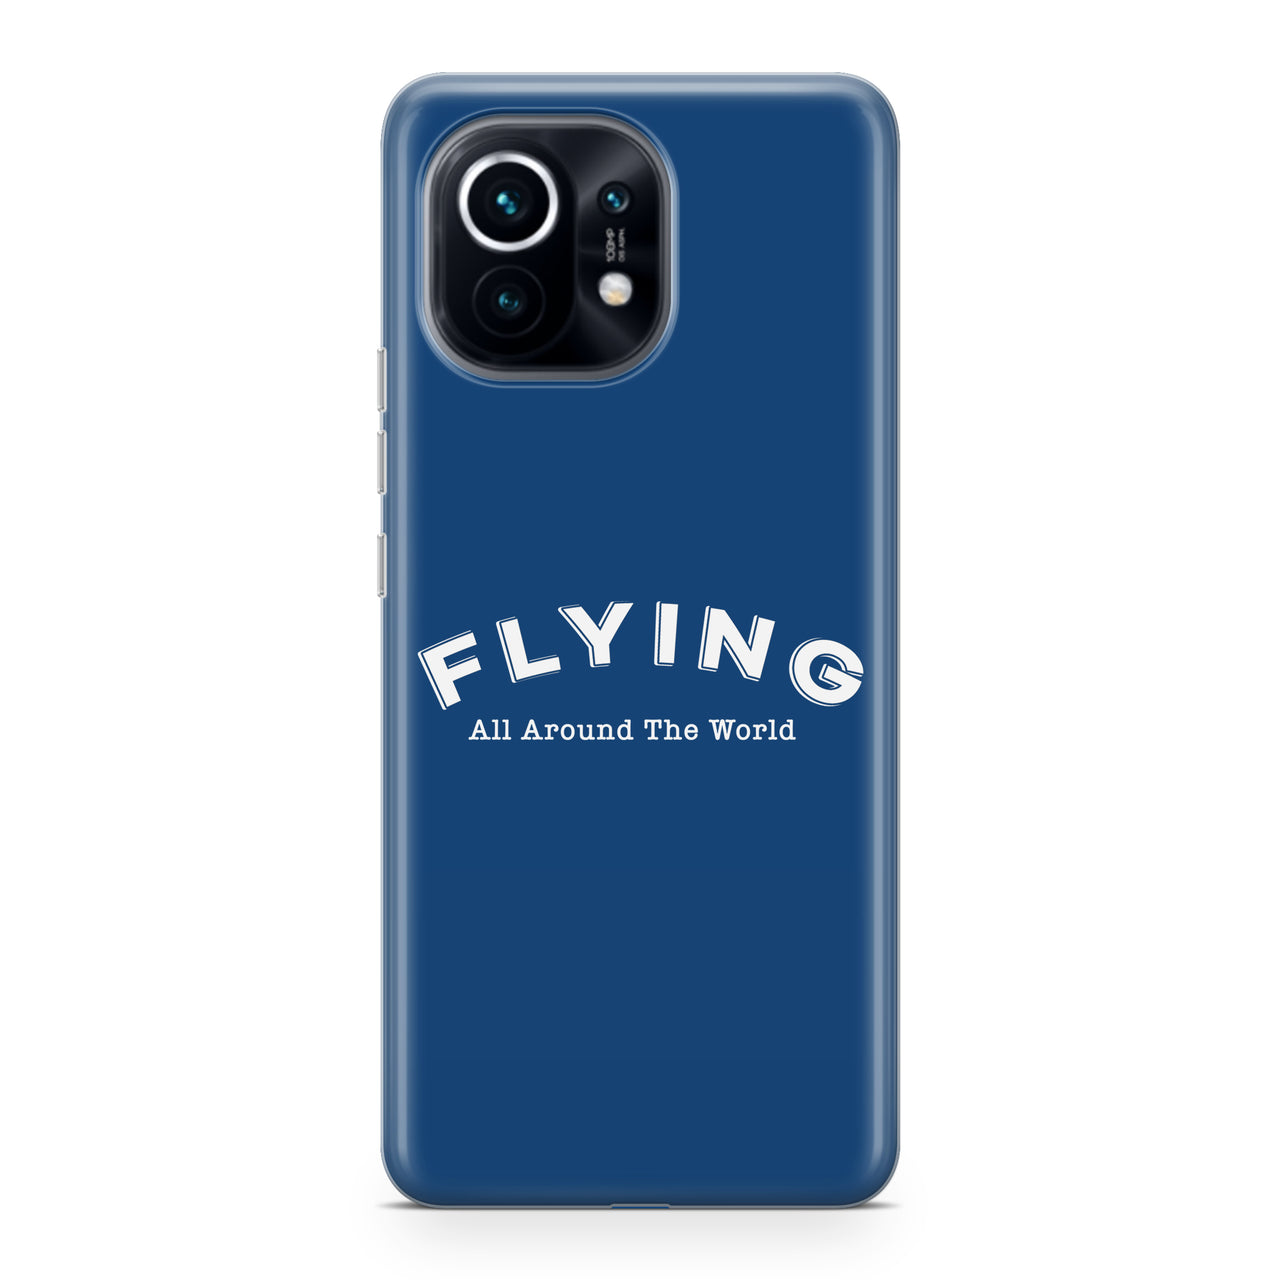 Flying All Around The World Designed Xiaomi Cases